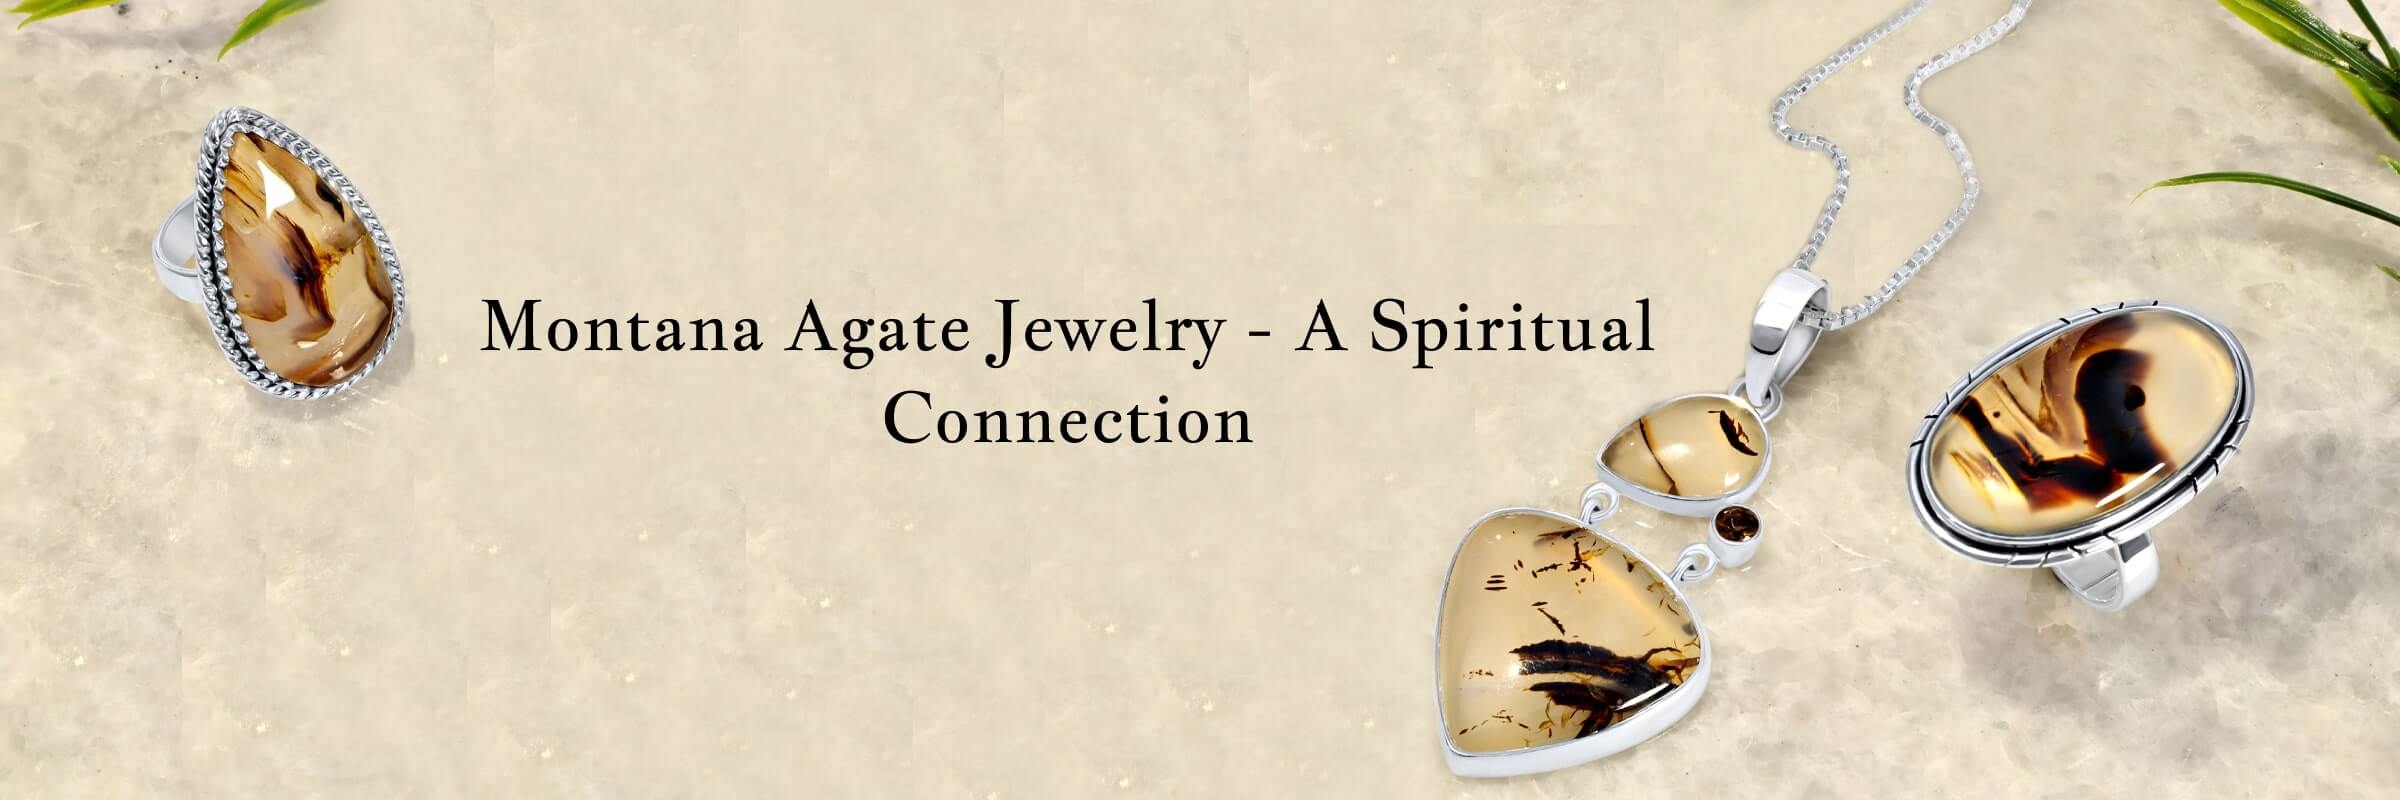 Metaphysical properties of Montana Agate Jewelry